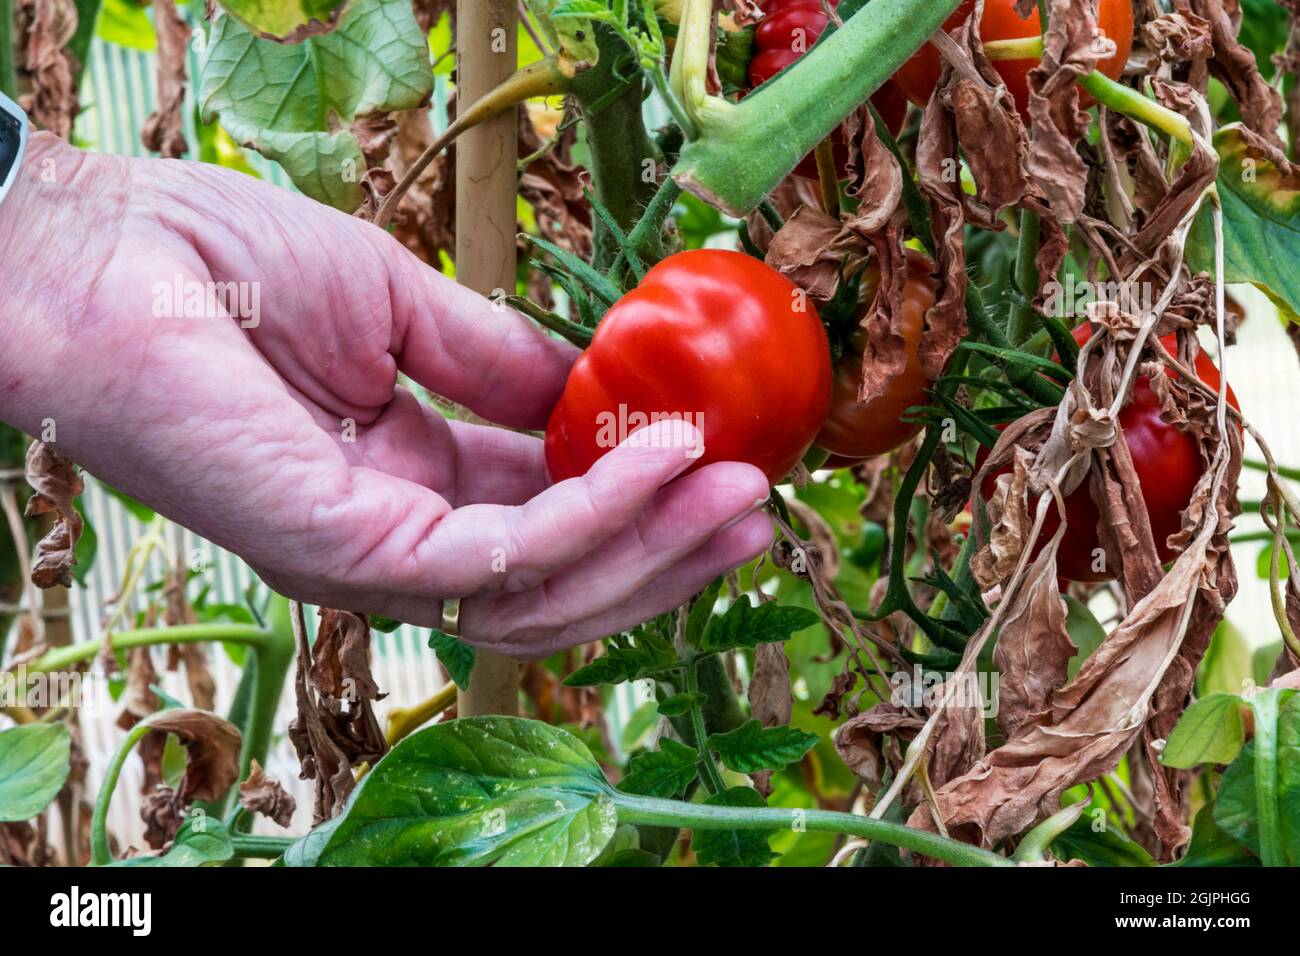 Woman picking Marmande tomato, Solanum lycopersicum, grown in her greenhouse. Stock Photo